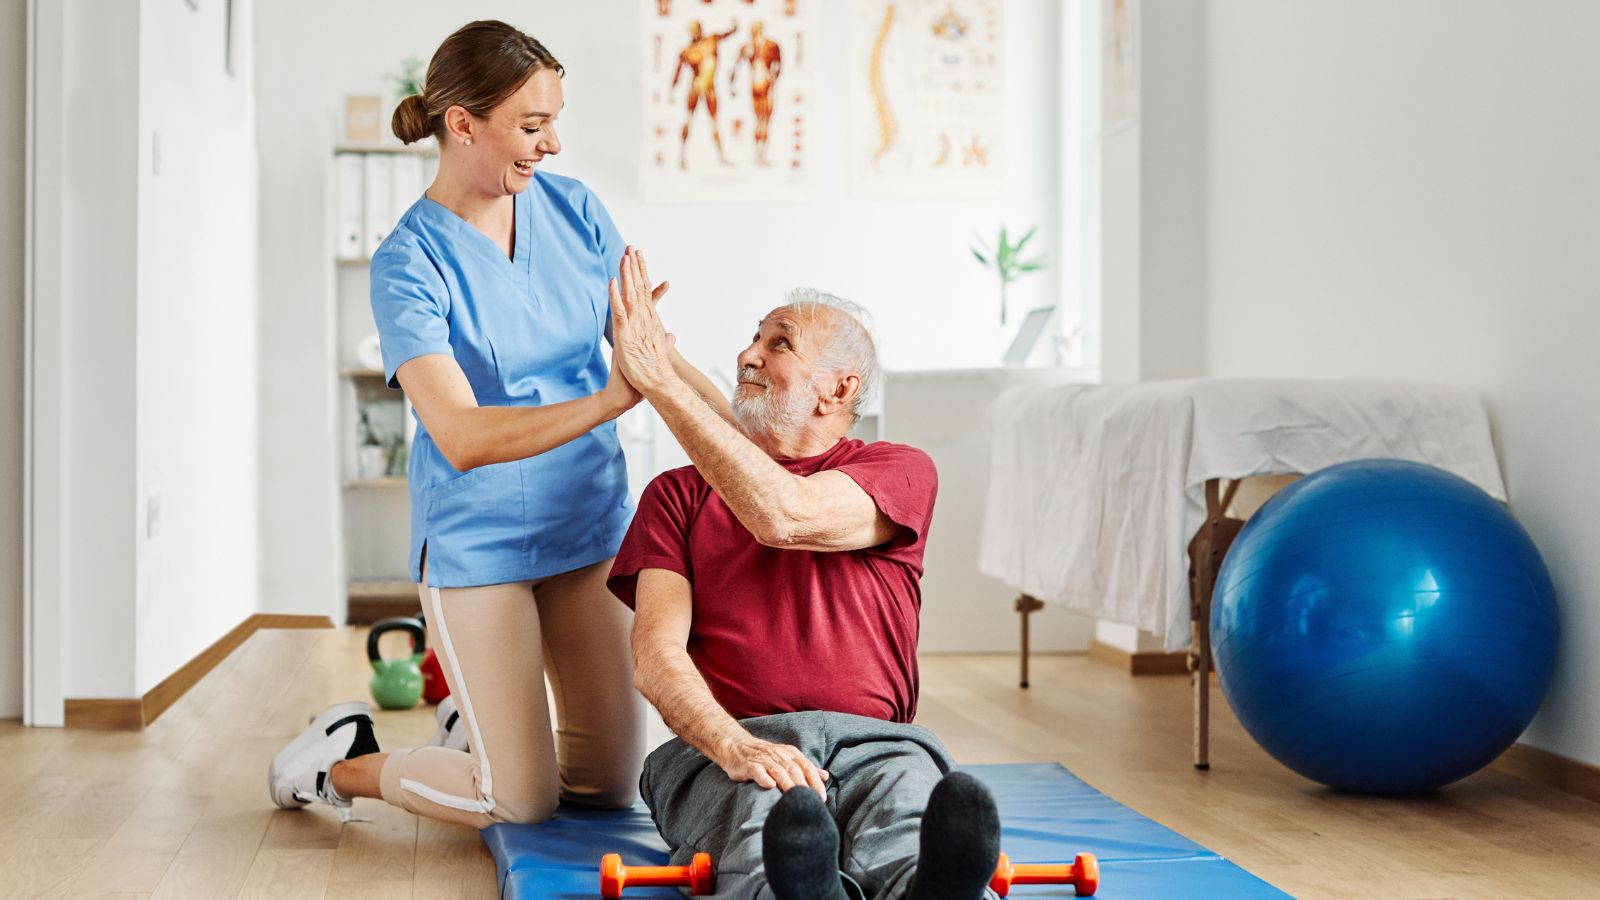 <p>Physical therapists help people bounce back from injuries and manage chronic conditions with customized treatment plans. Their unique skills are highly sought after, offering great pay and career growth opportunities. Plus, there's the awesome feeling of making a real difference in patients' lives.</p>